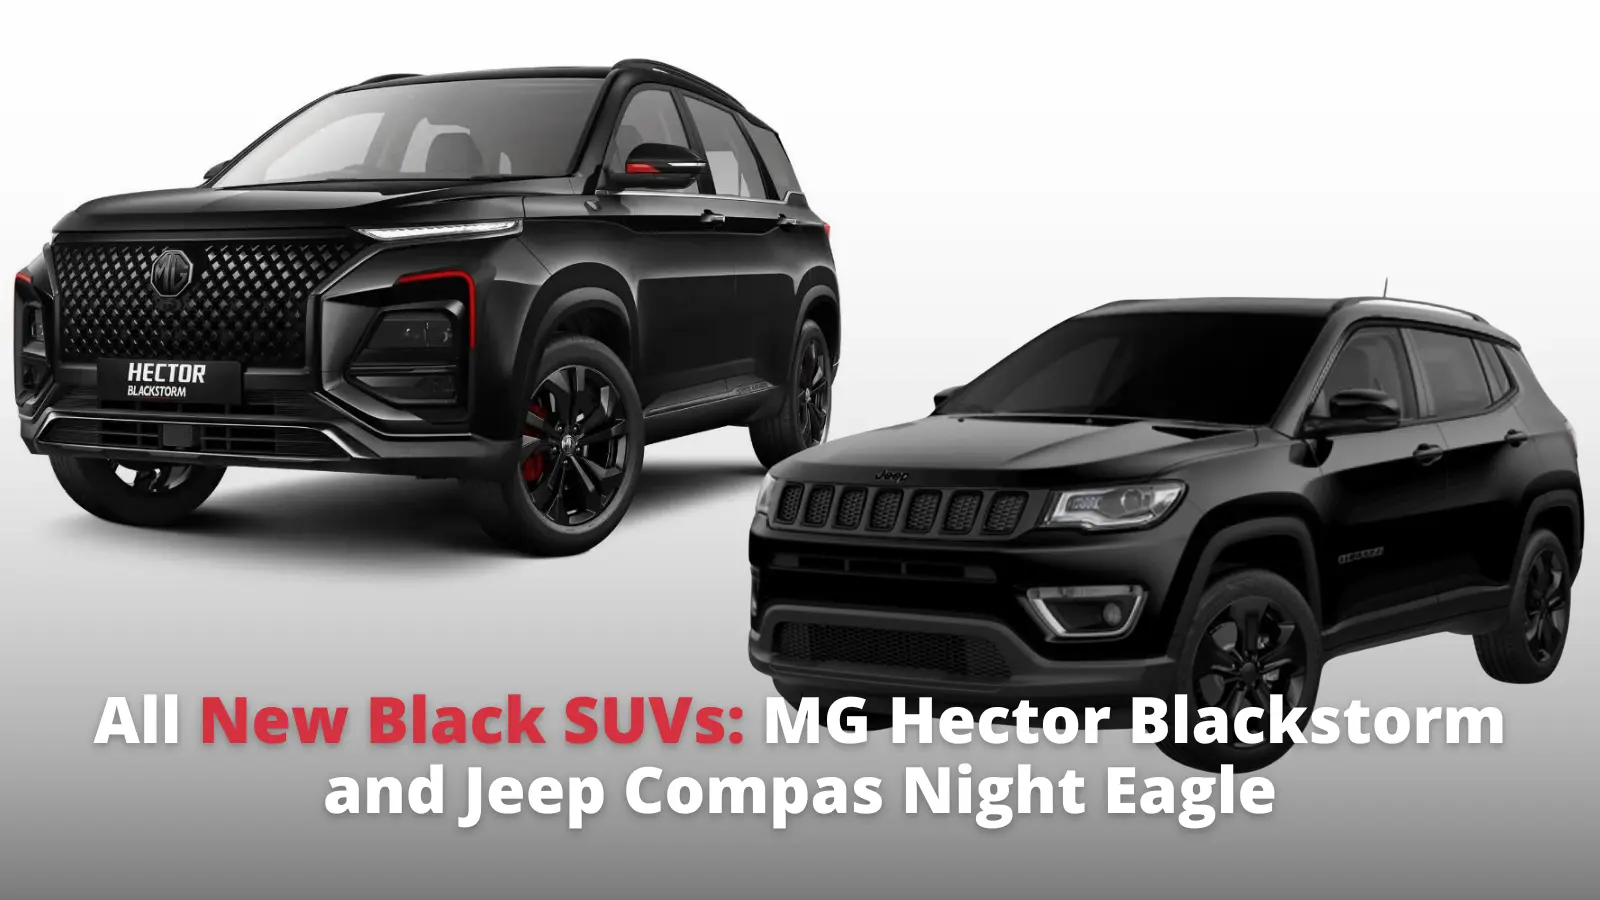 MG Hector Blackstorm and Jeep Compass Night Eagle